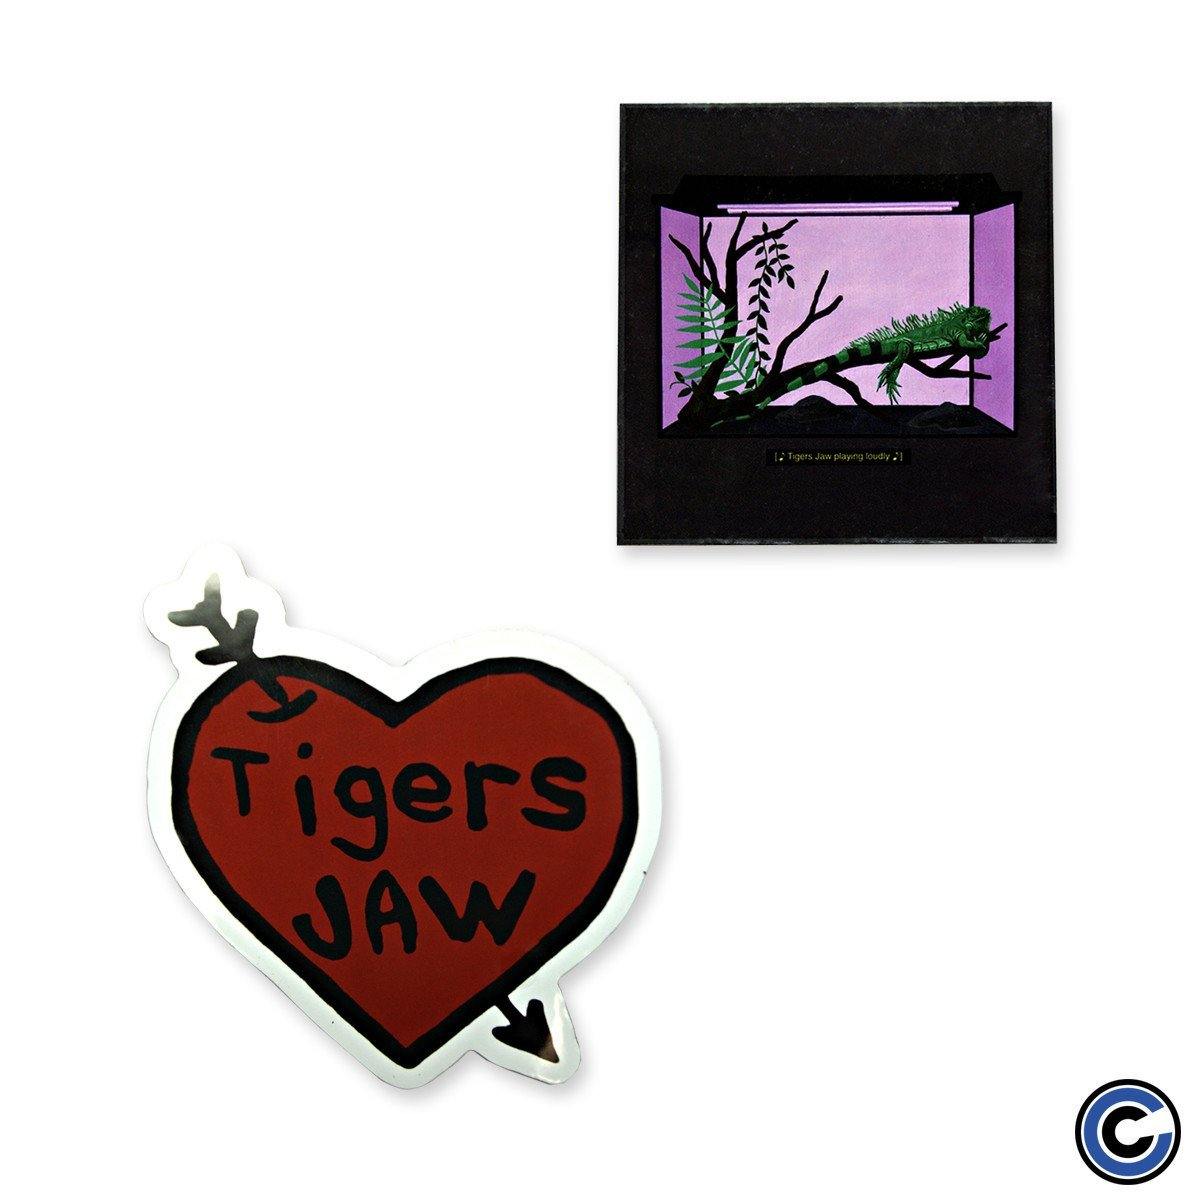 Buy – Tigers Jaw Magnets – Band & Music Merch – Cold Cuts Merch